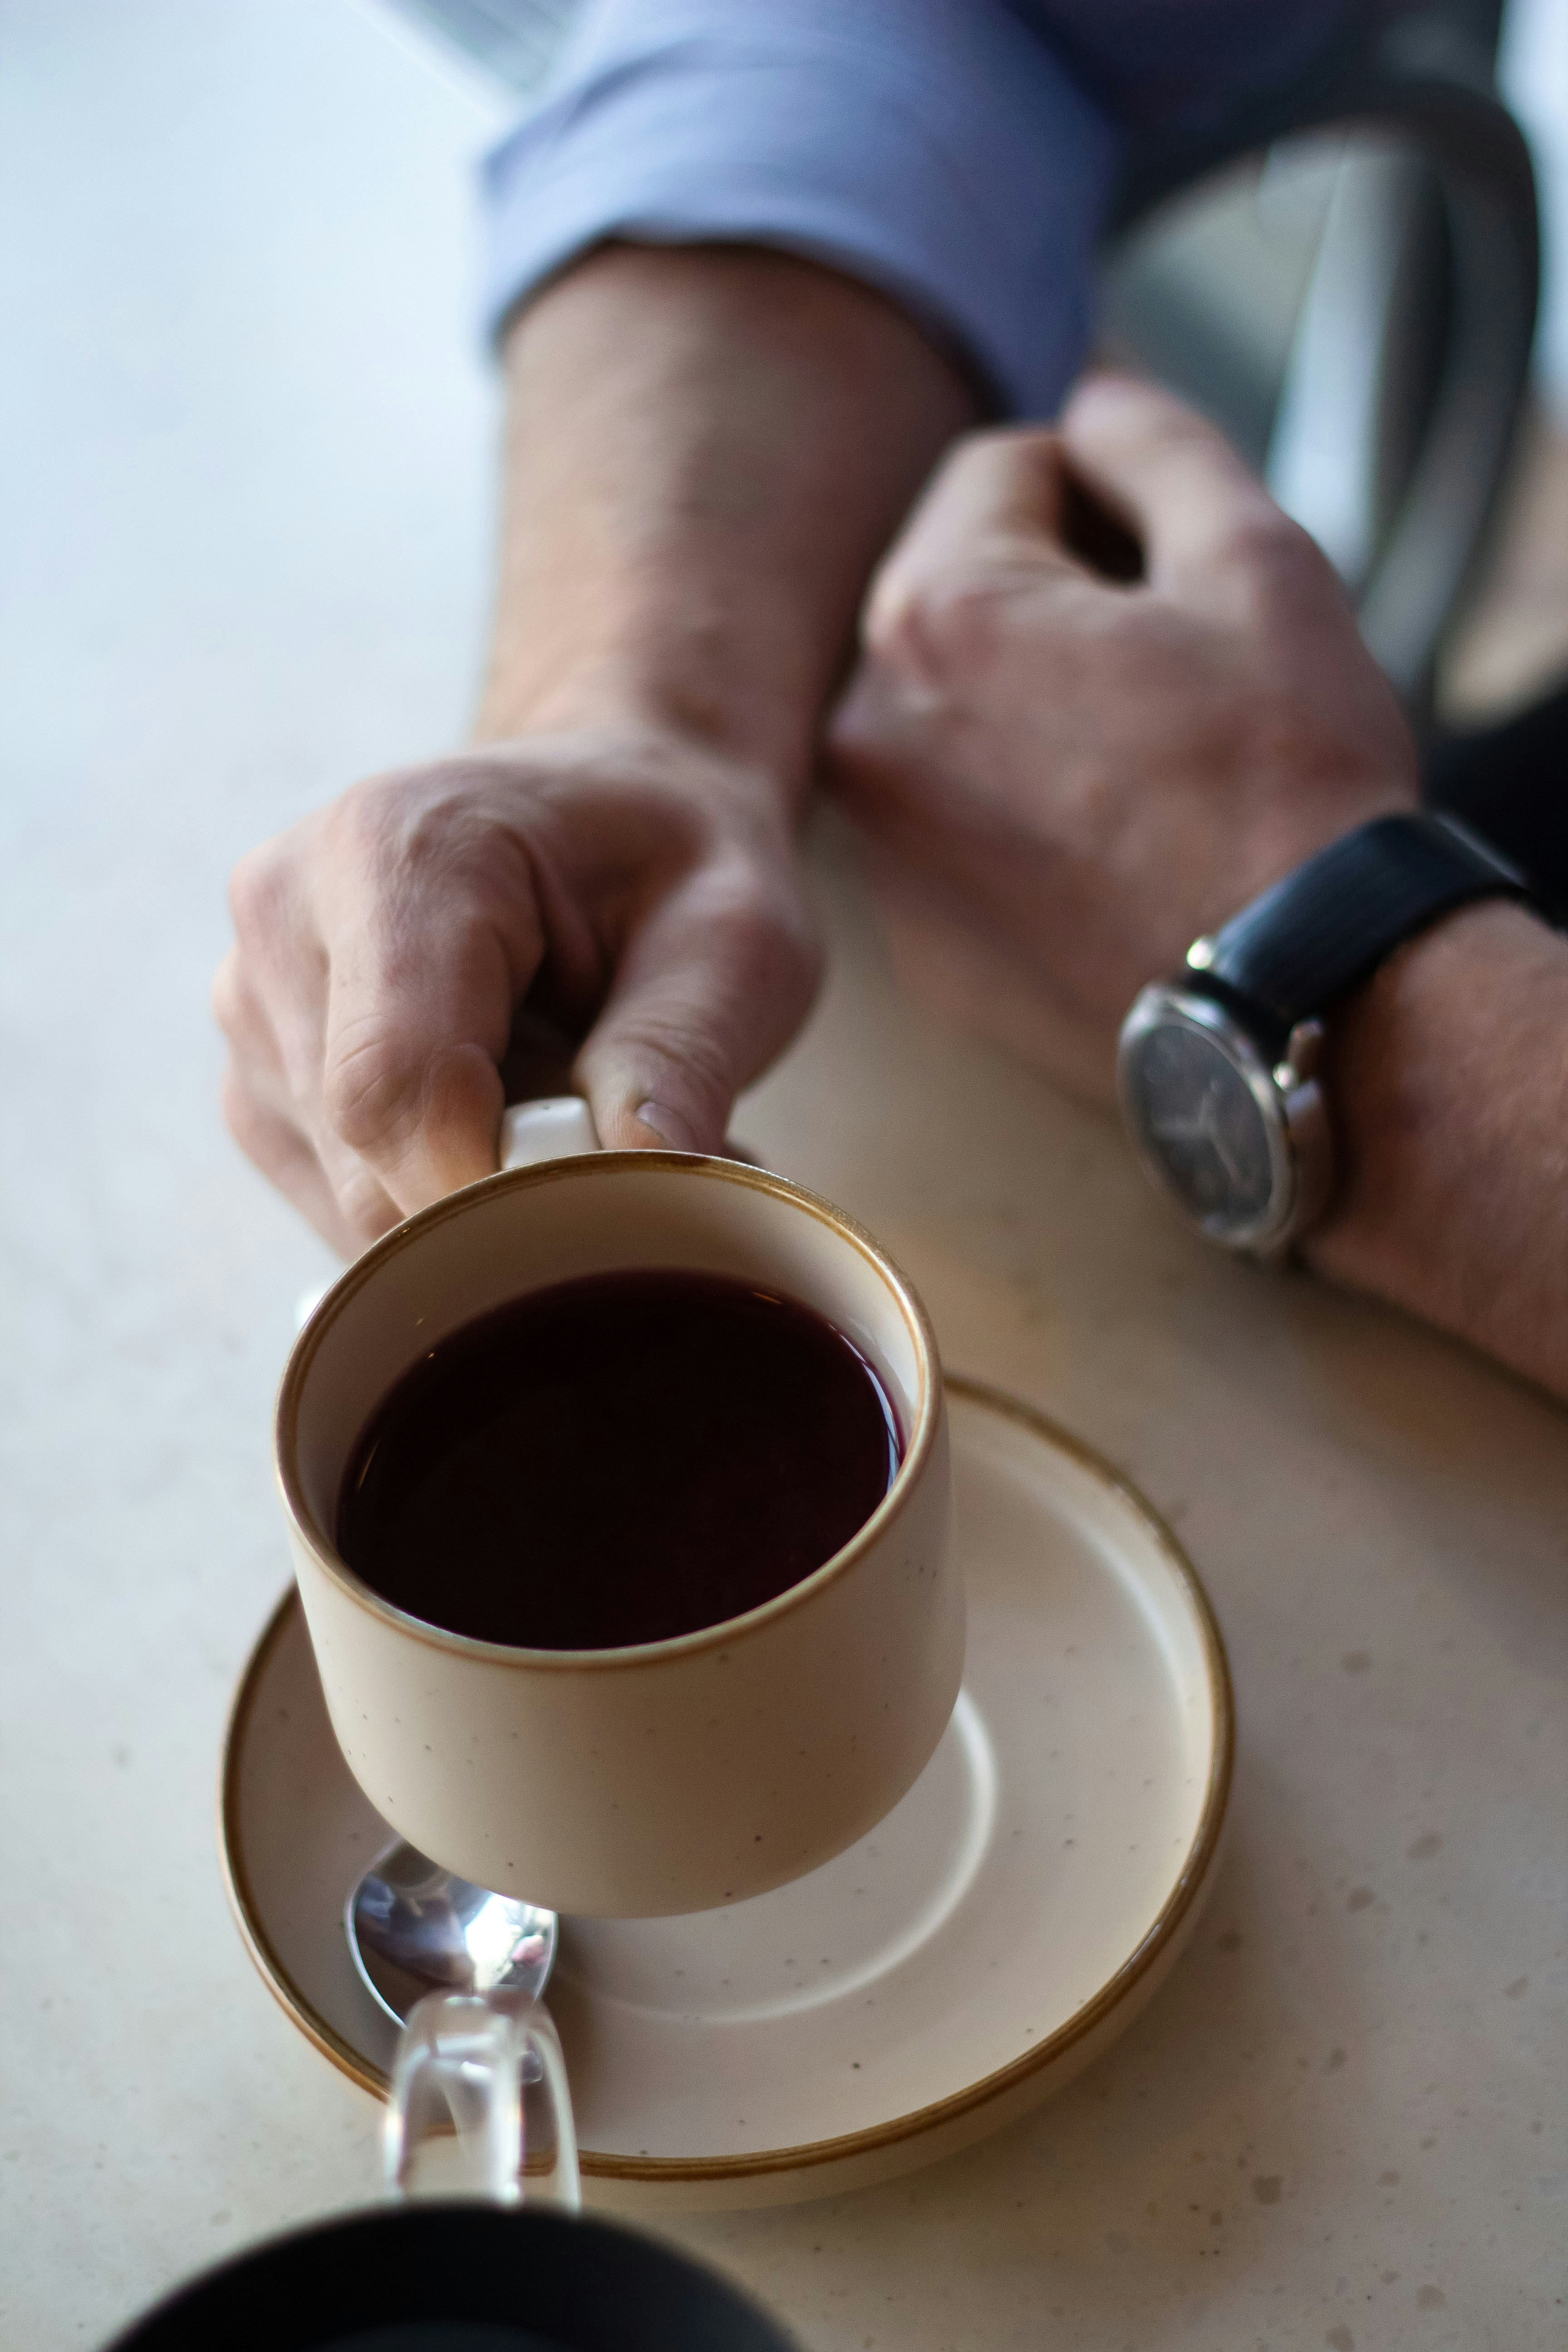 A cup of coffee | Source: Unsplash